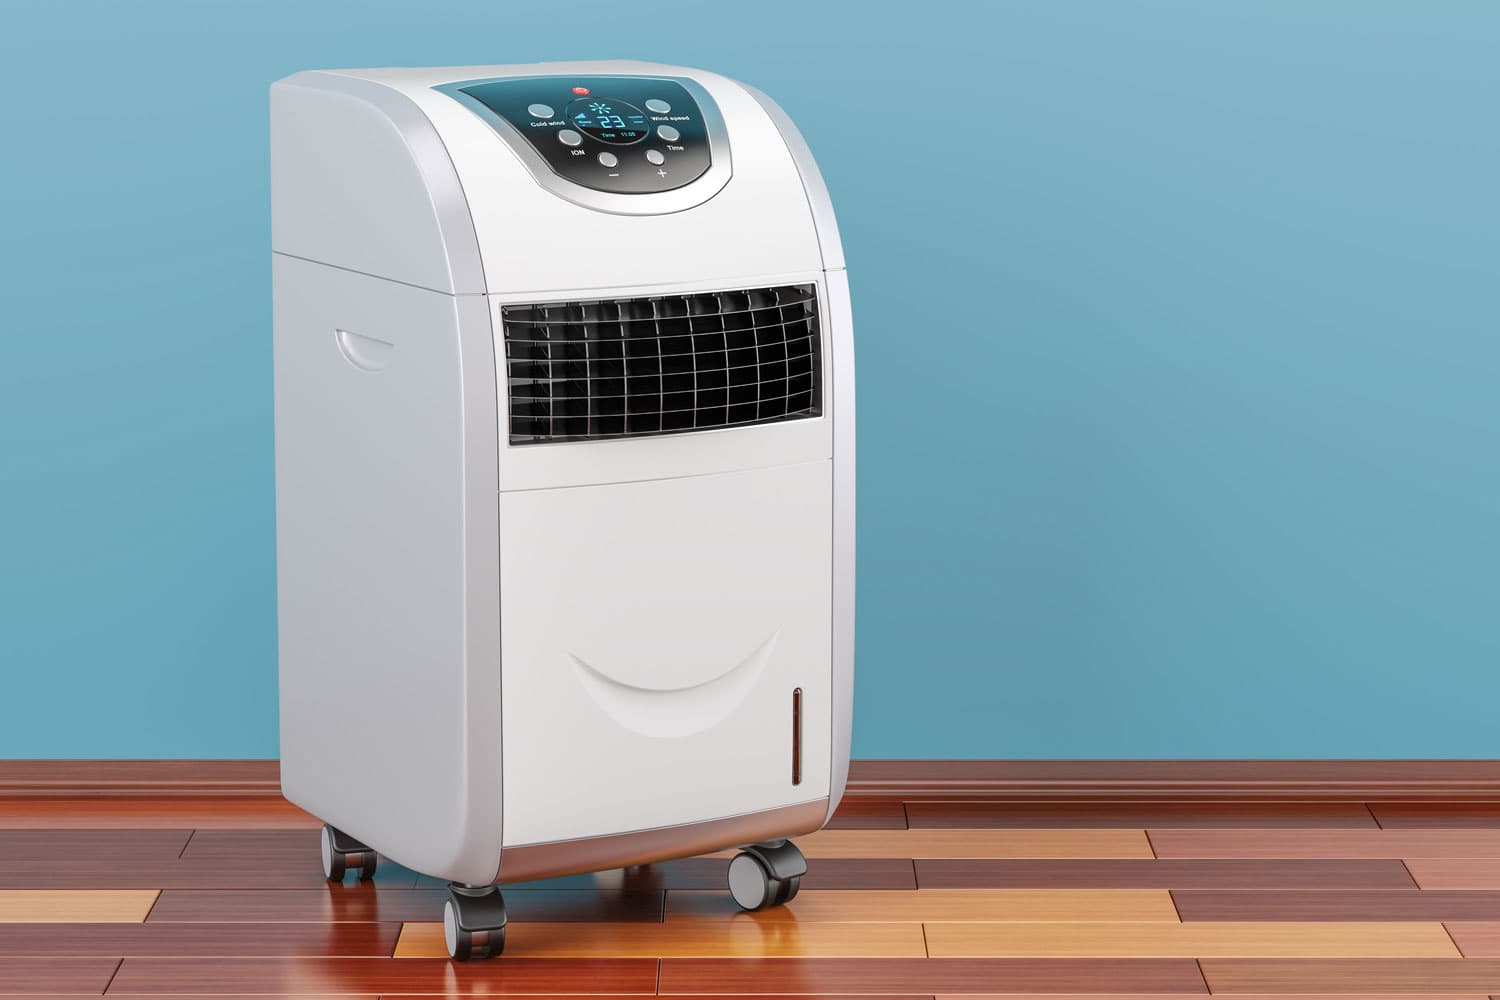 Portable Air Conditioner in room on the wooden floor,